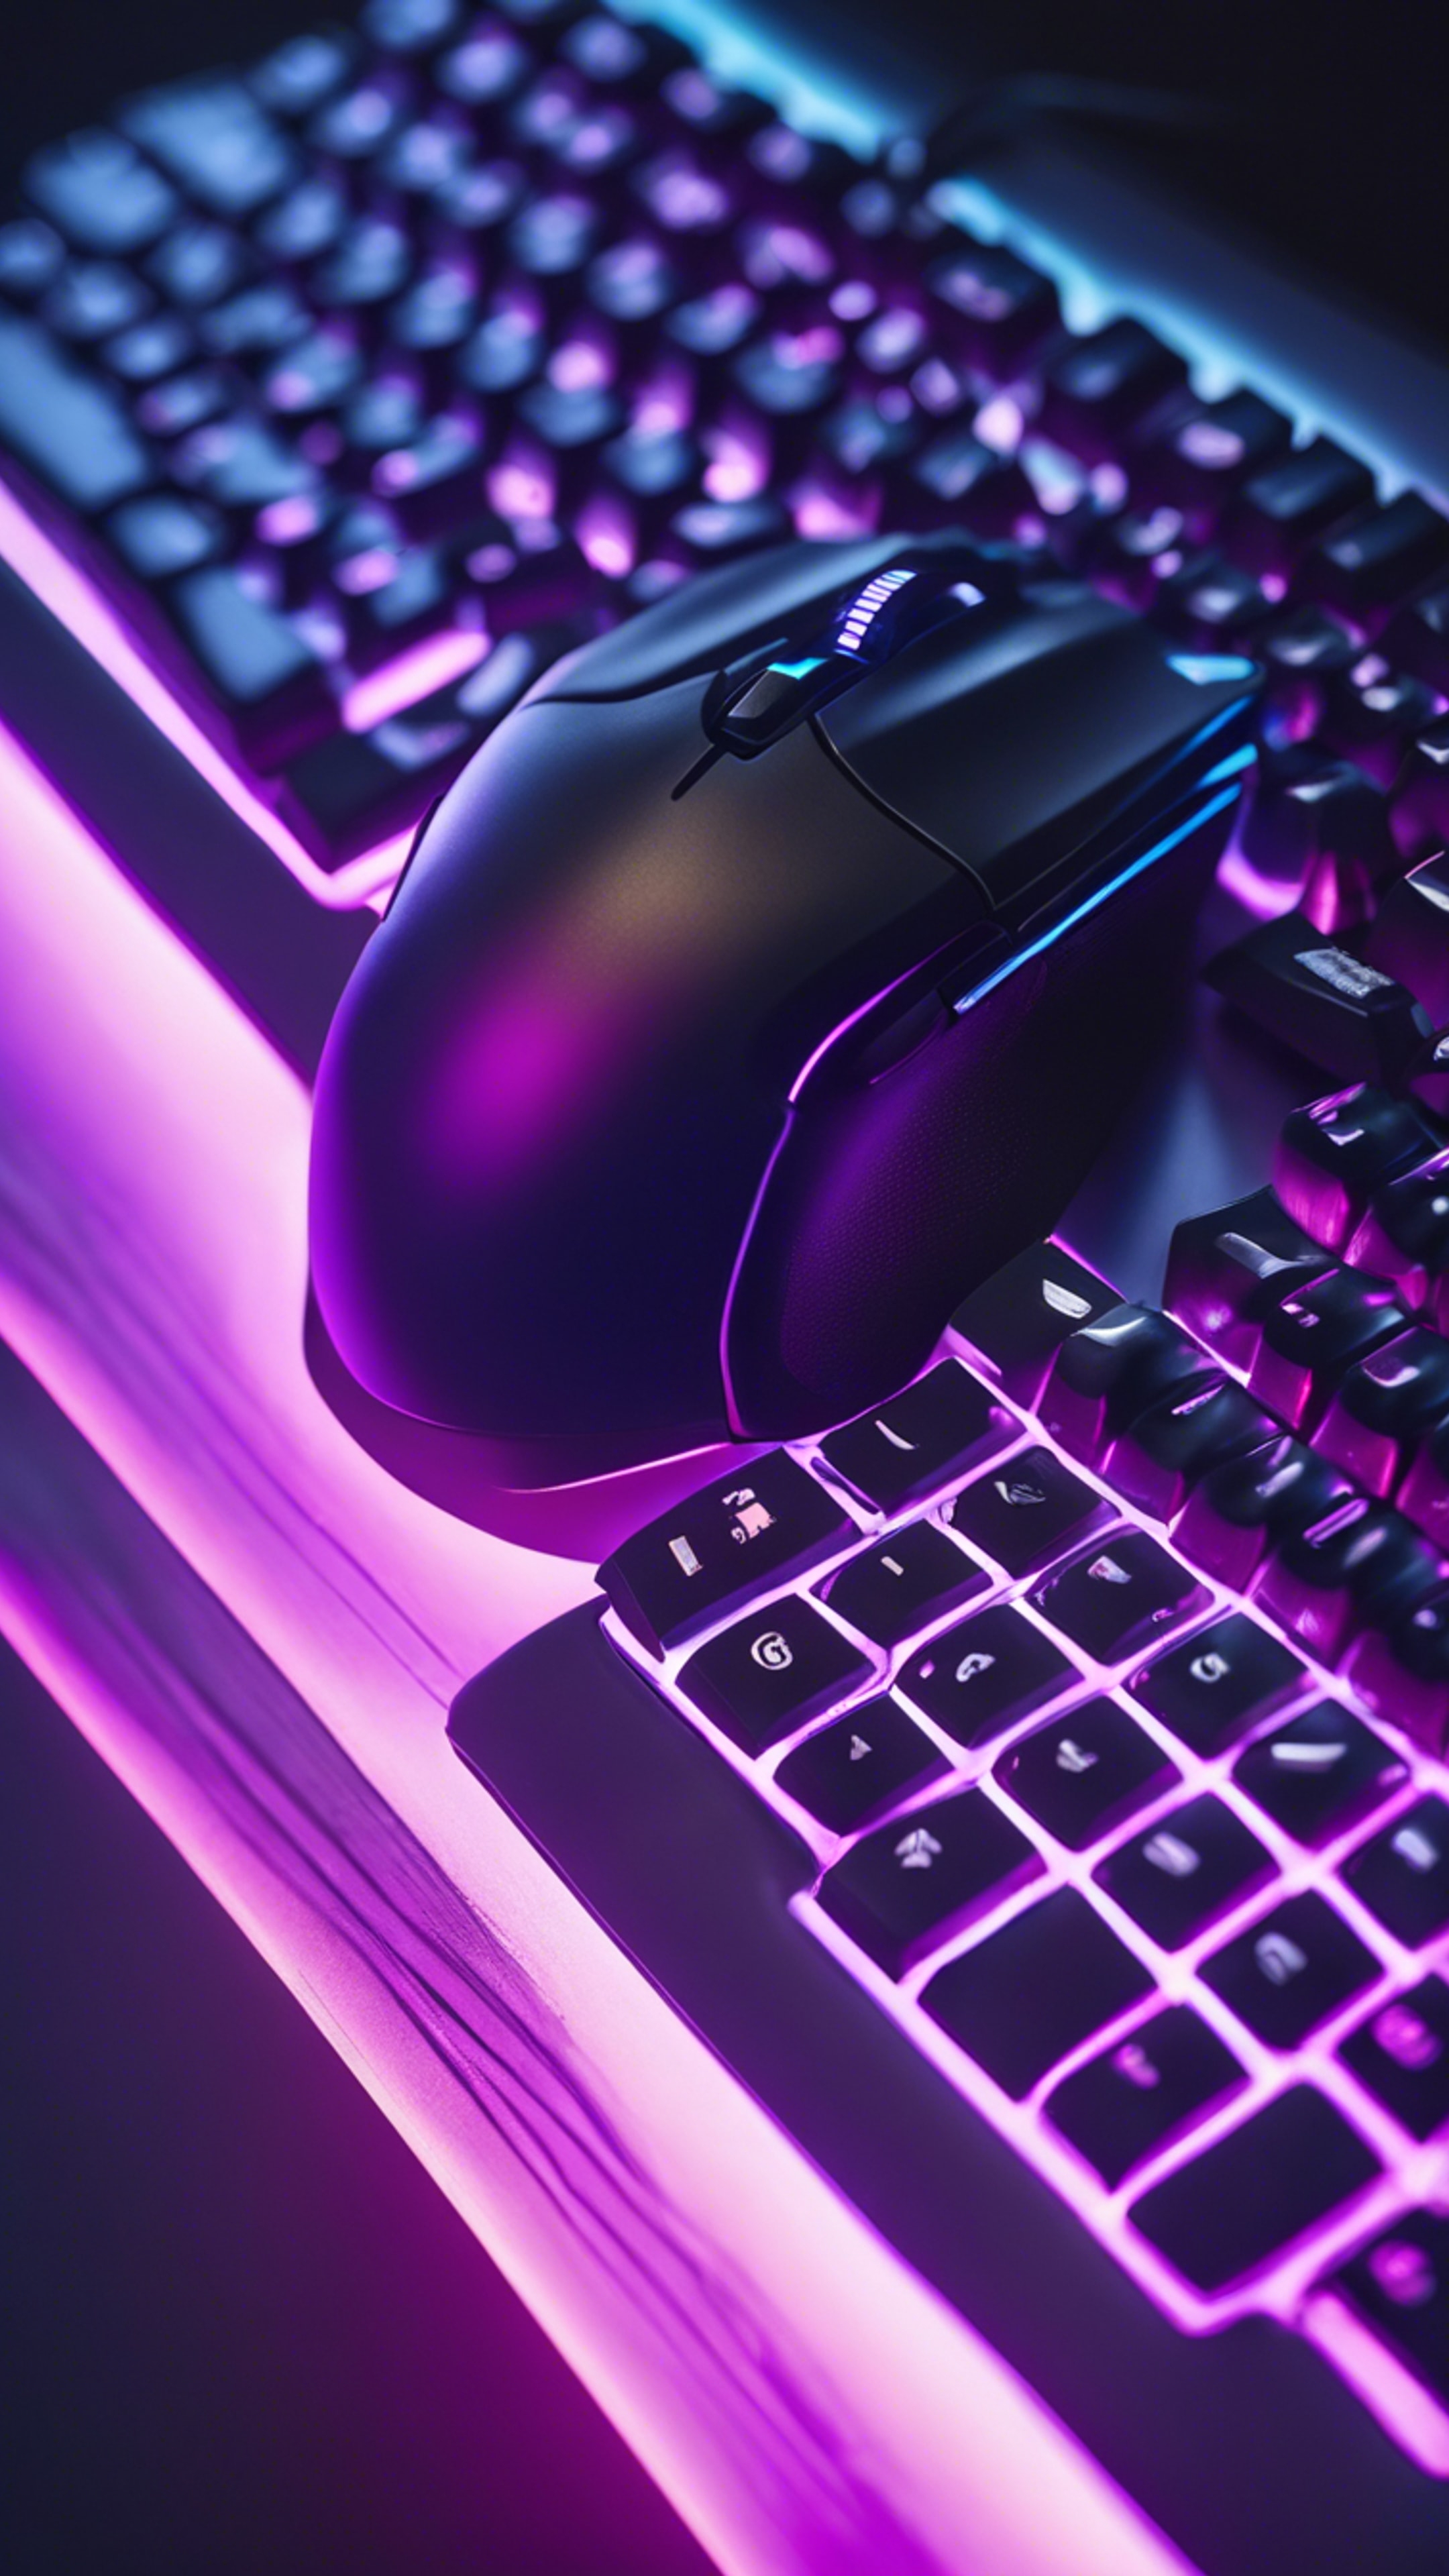 A top down view of a gaming keyboard and mouse bathed in a soothing gradient of blue to purple backlighting. Hintergrund[d1c9d3144afe4da3b536]